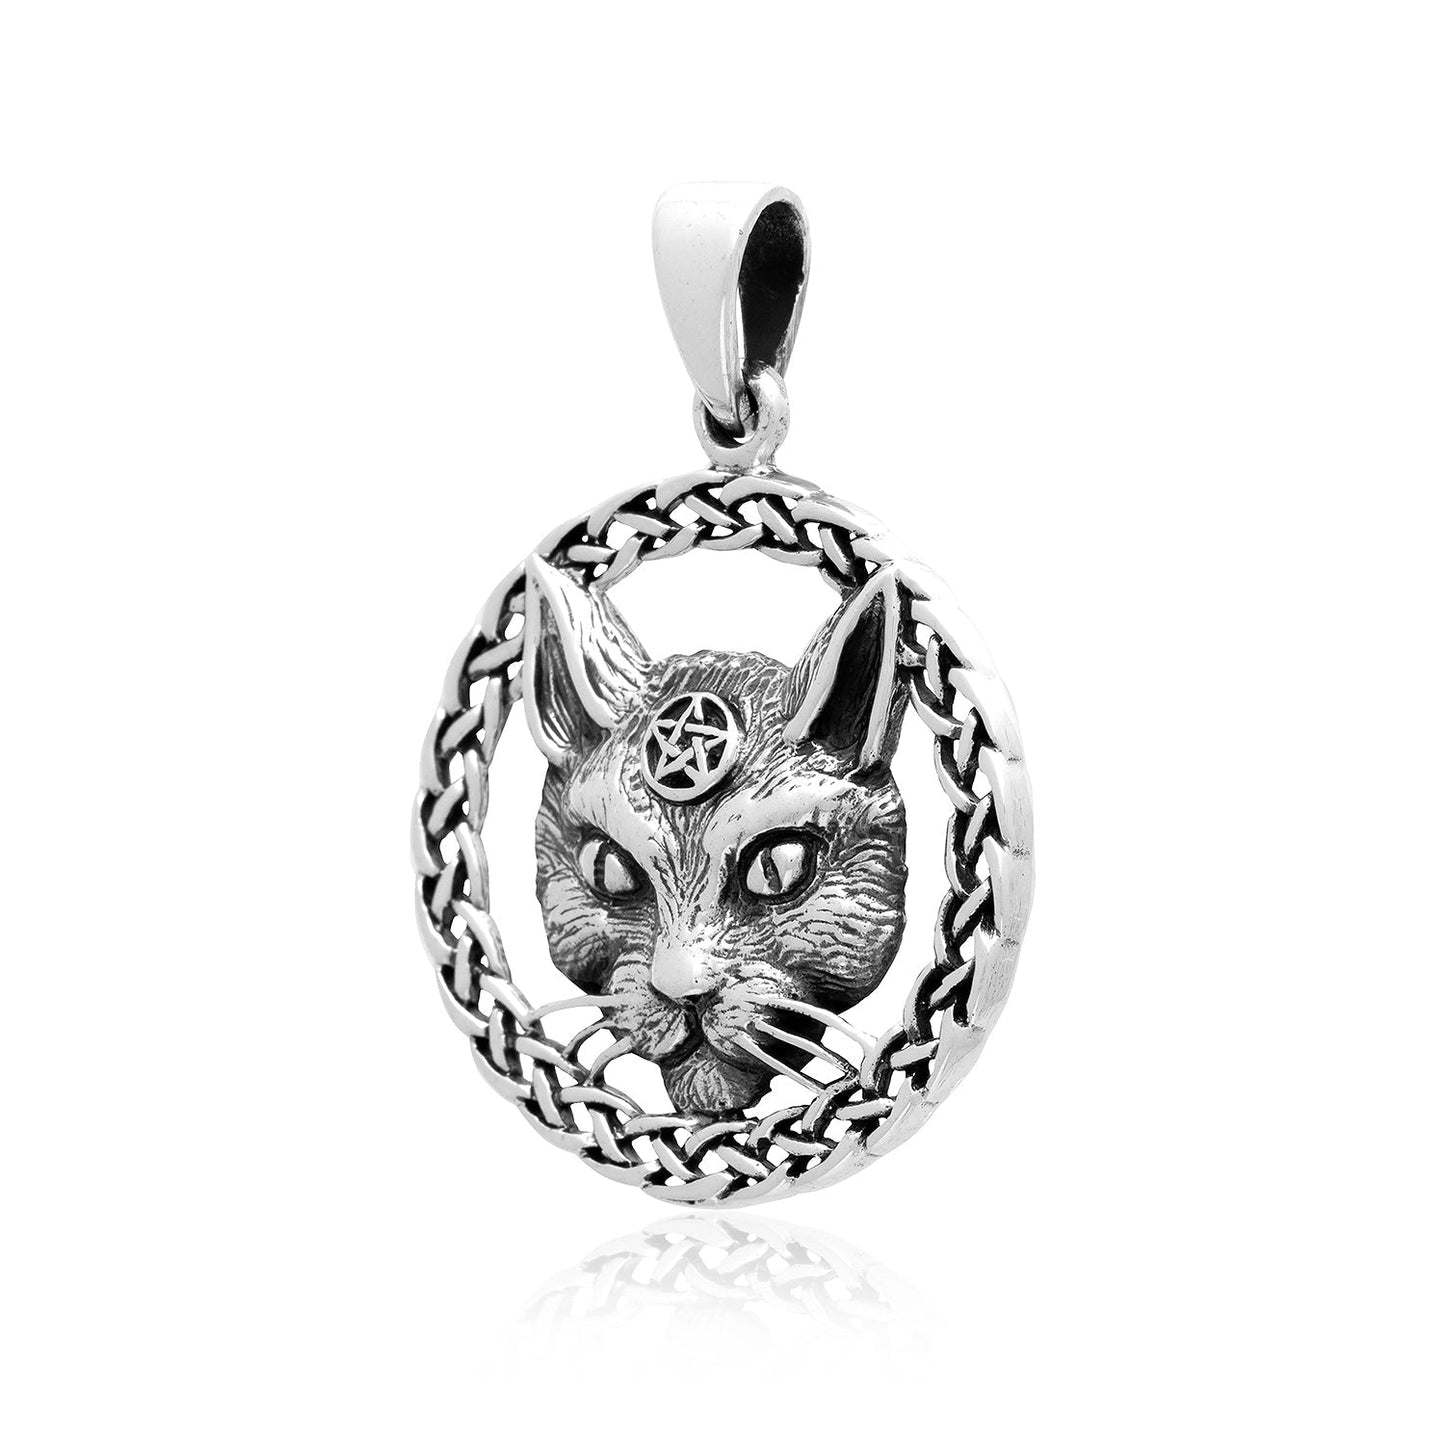 925 Sterling Silver Wiccan Cat Pendant with Pentagram - SilverMania925